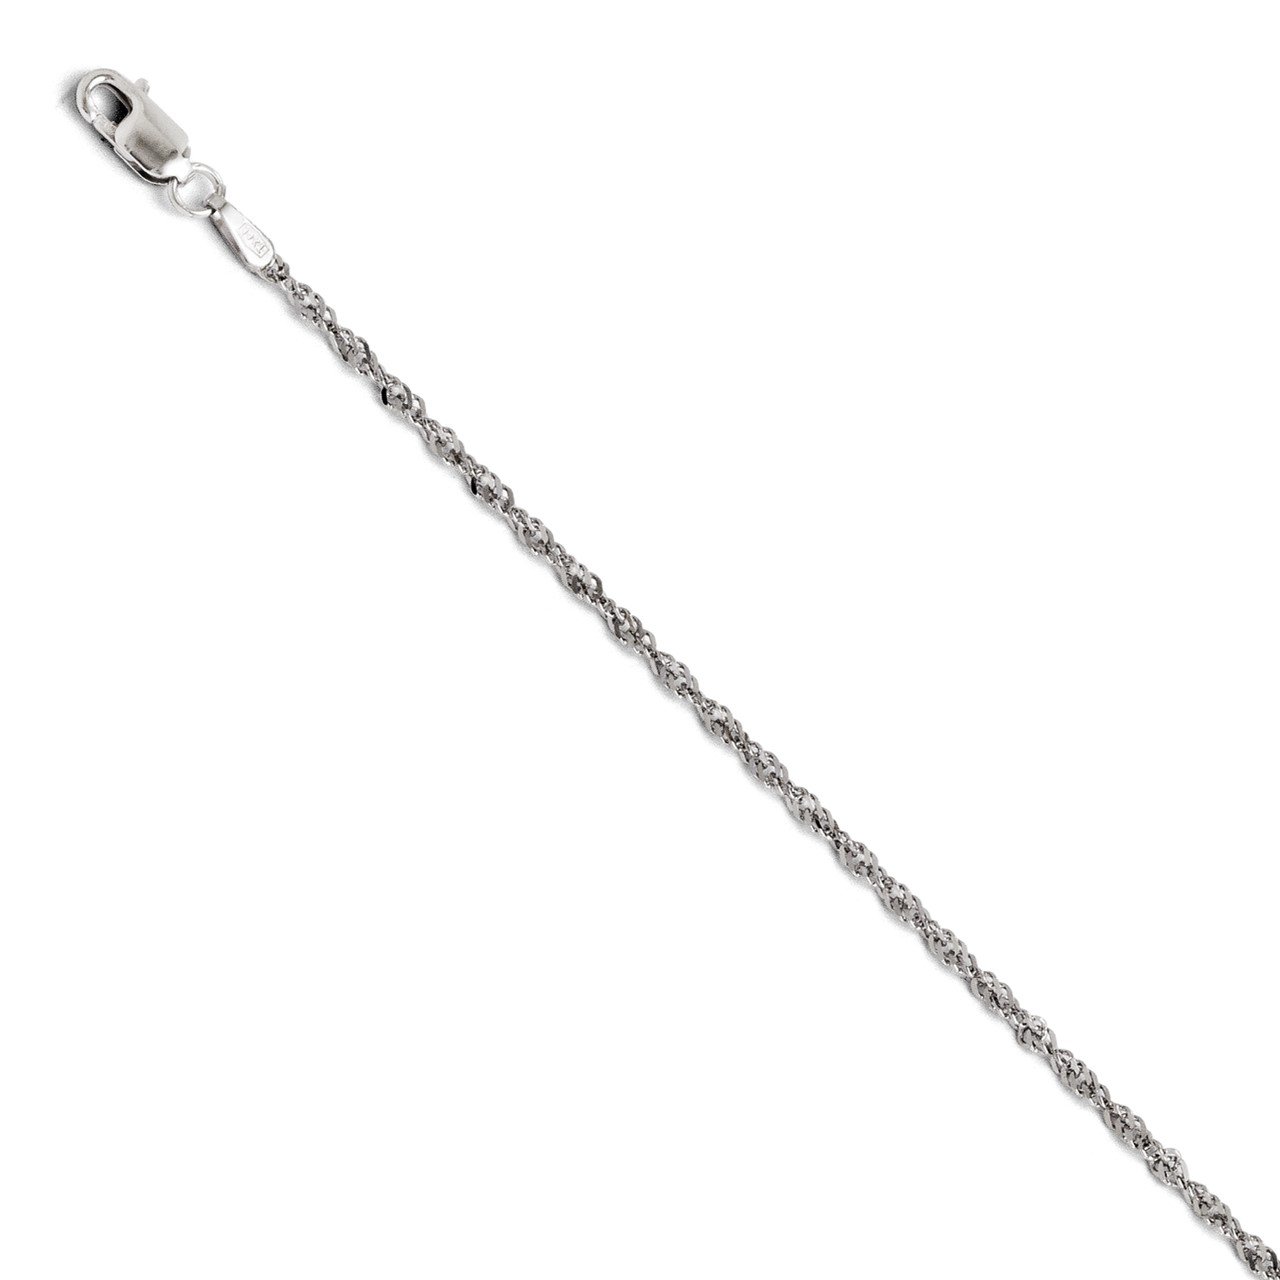 Leslie's 14K White Gold Singapore with Lock Chain